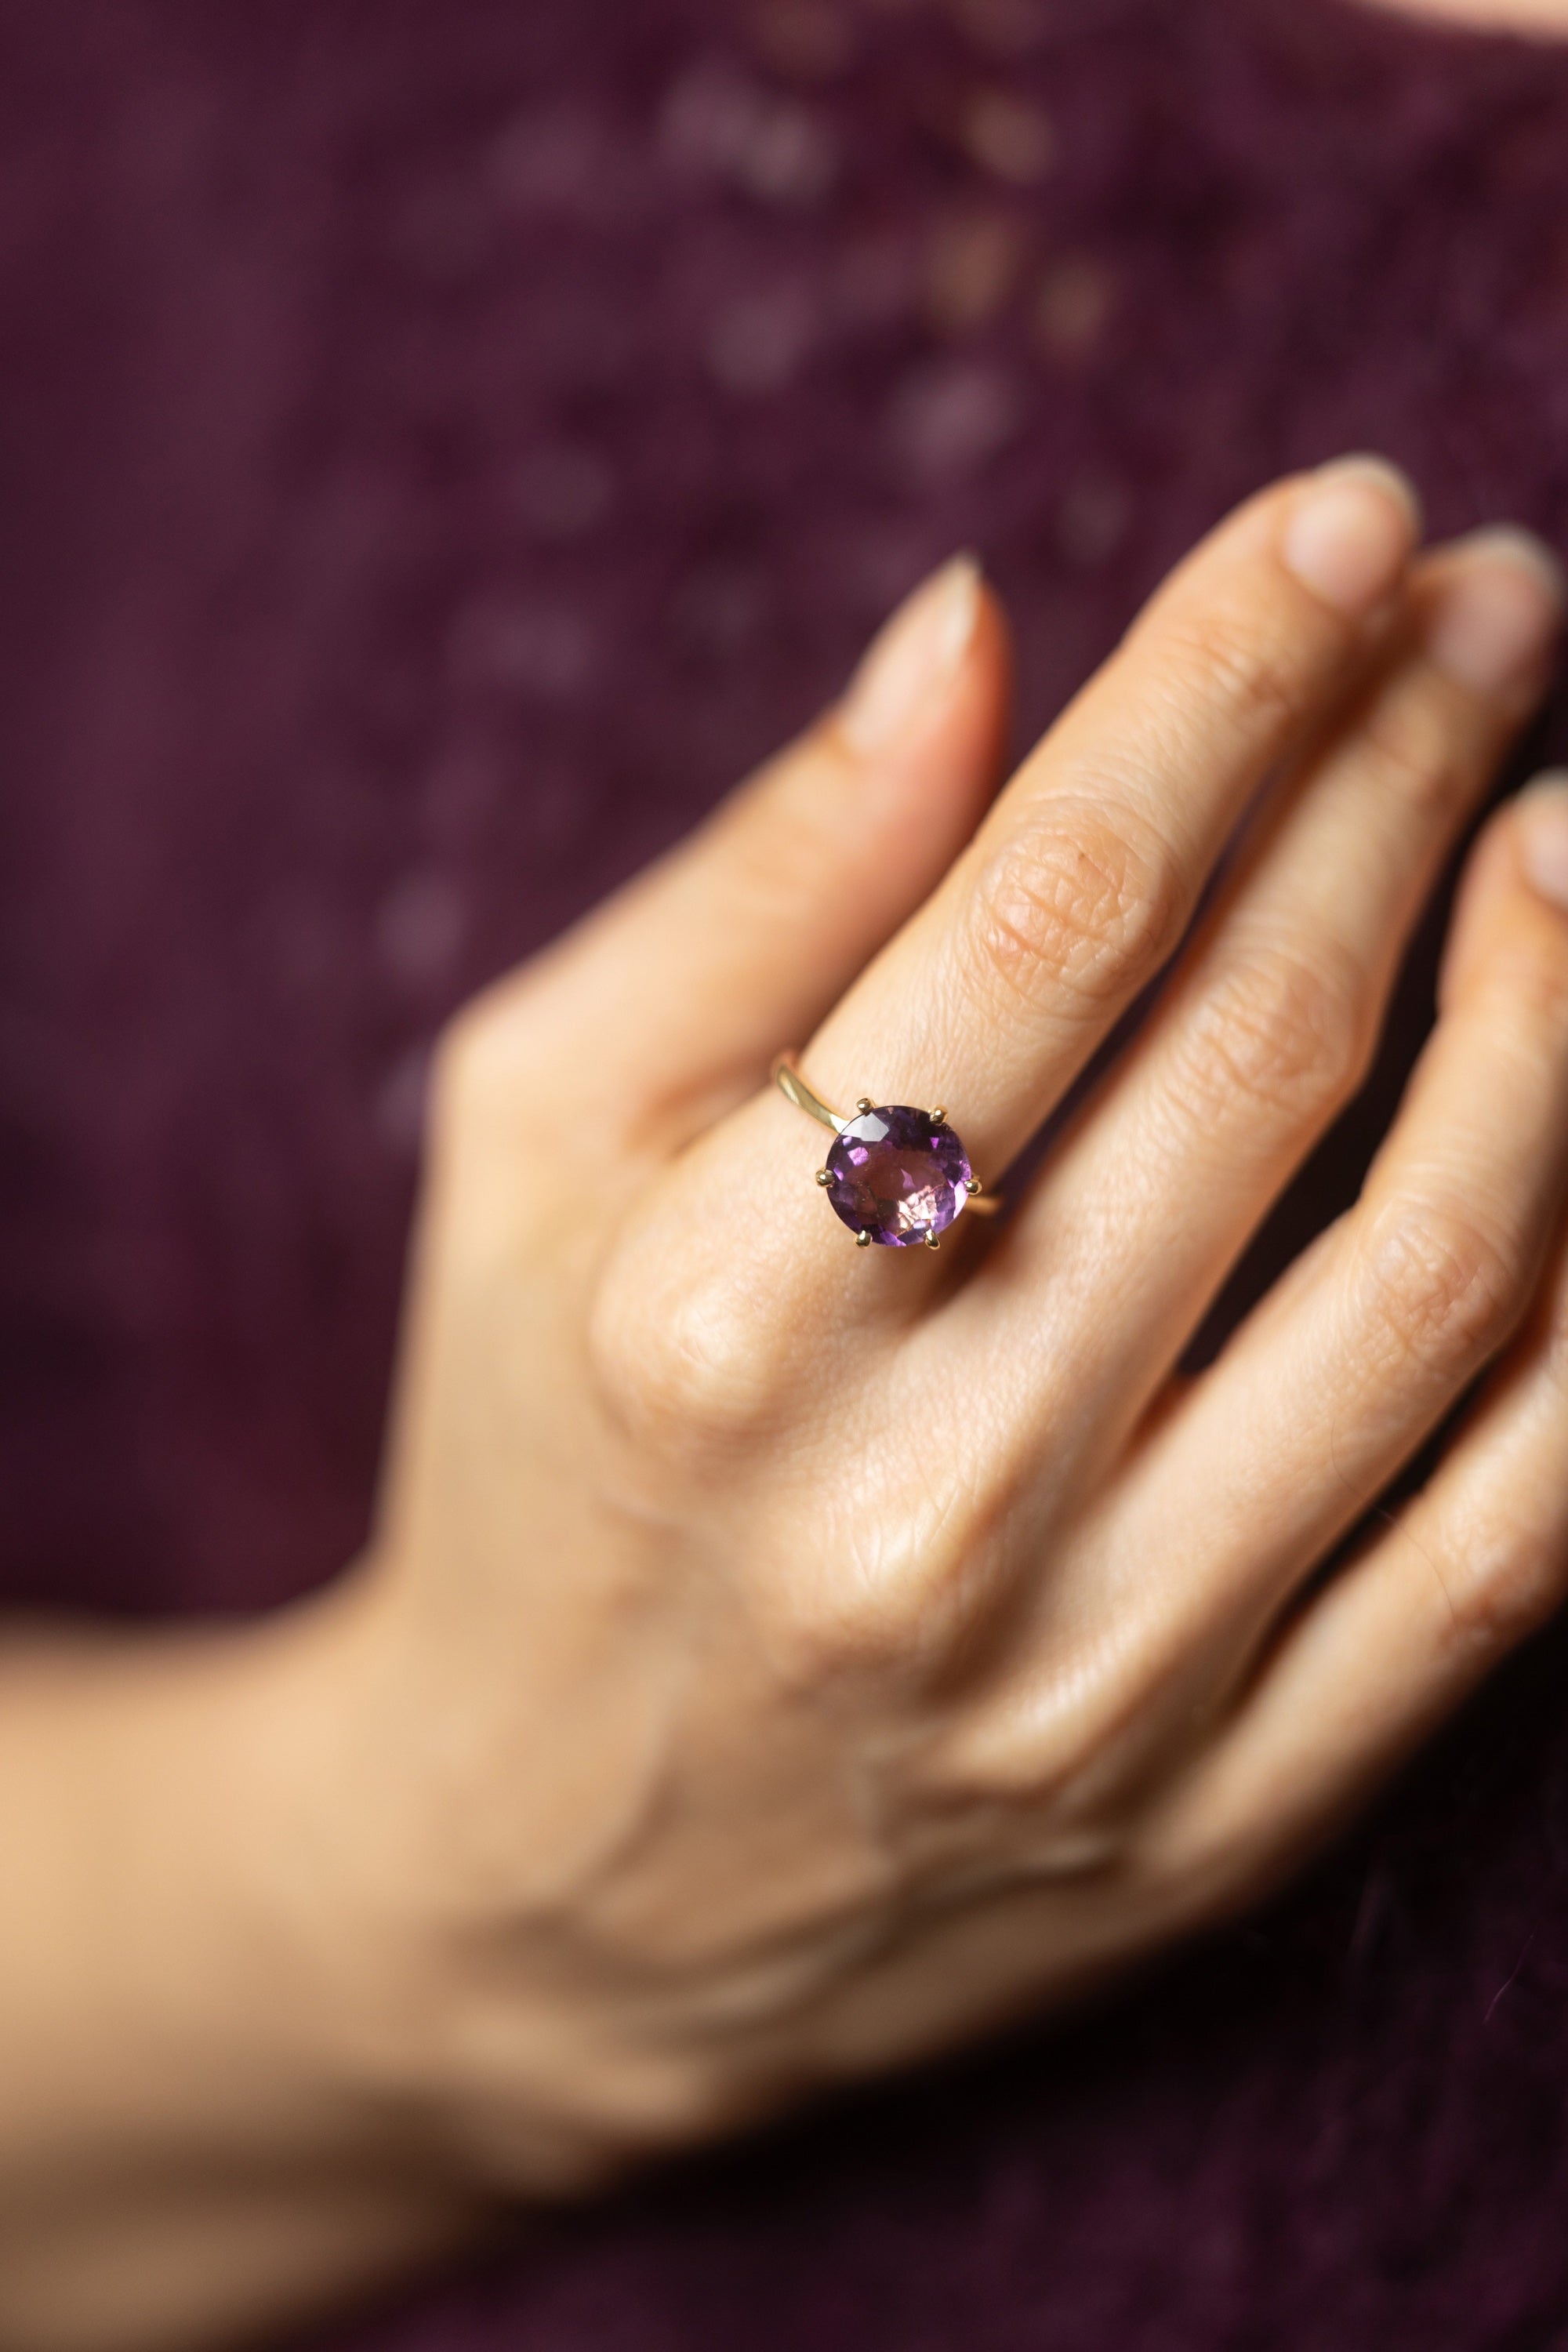 Large Amethyst Ring with 6 Prongs